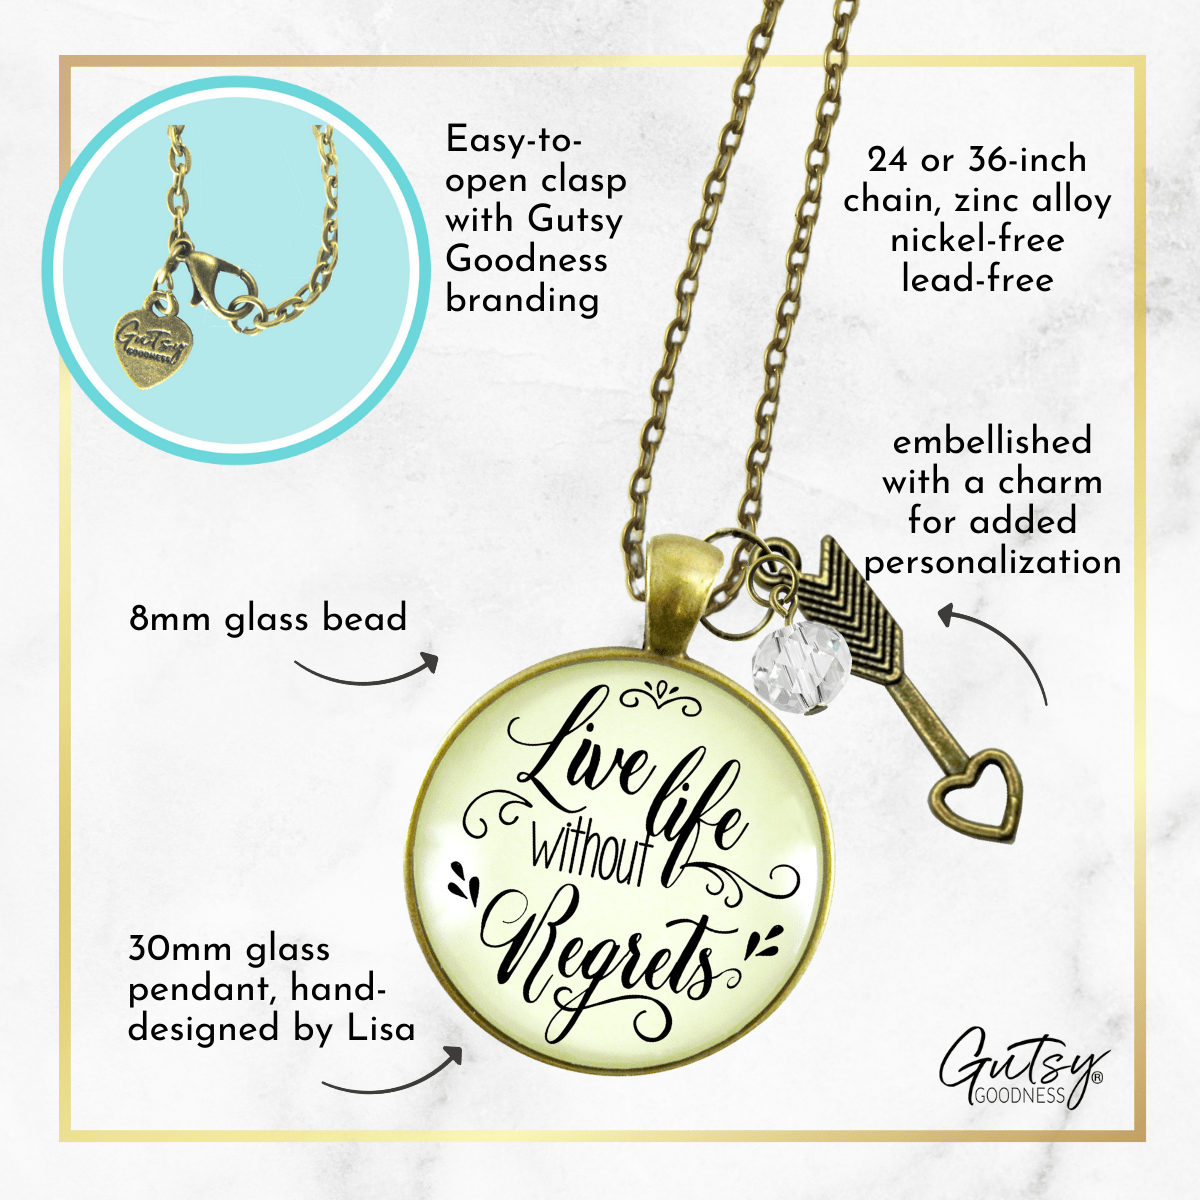 Gutsy Goodness Live Life Without Regrets Necklace Motivational Jewelry Arrow Charm - Gutsy Goodness;Live Life Without Regrets Necklace Motivational Jewelry Arrow Charm - Gutsy Goodness Handmade Jewelry Gifts